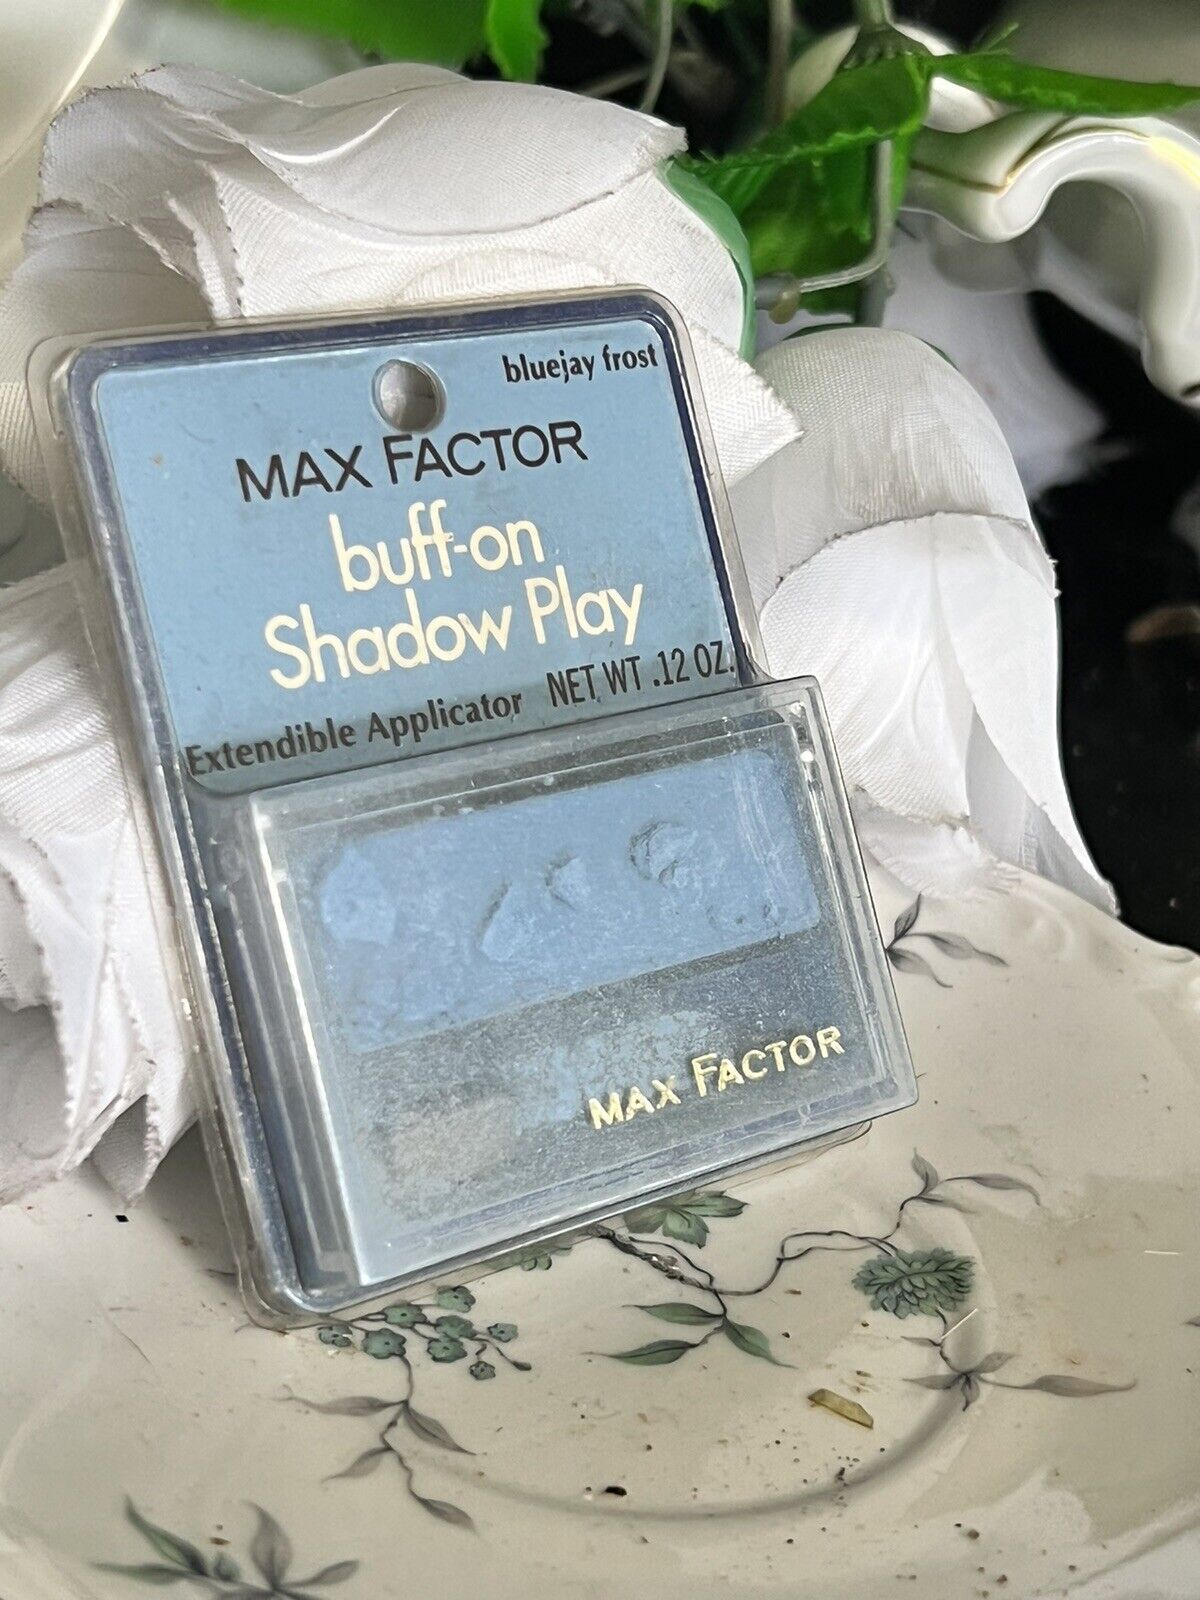 VINTAGE MAX FACTOR HOLLYWOOD COLLECTIBLE  BUFF ON SHADOW PLAY BLUEJAY FROST NEW